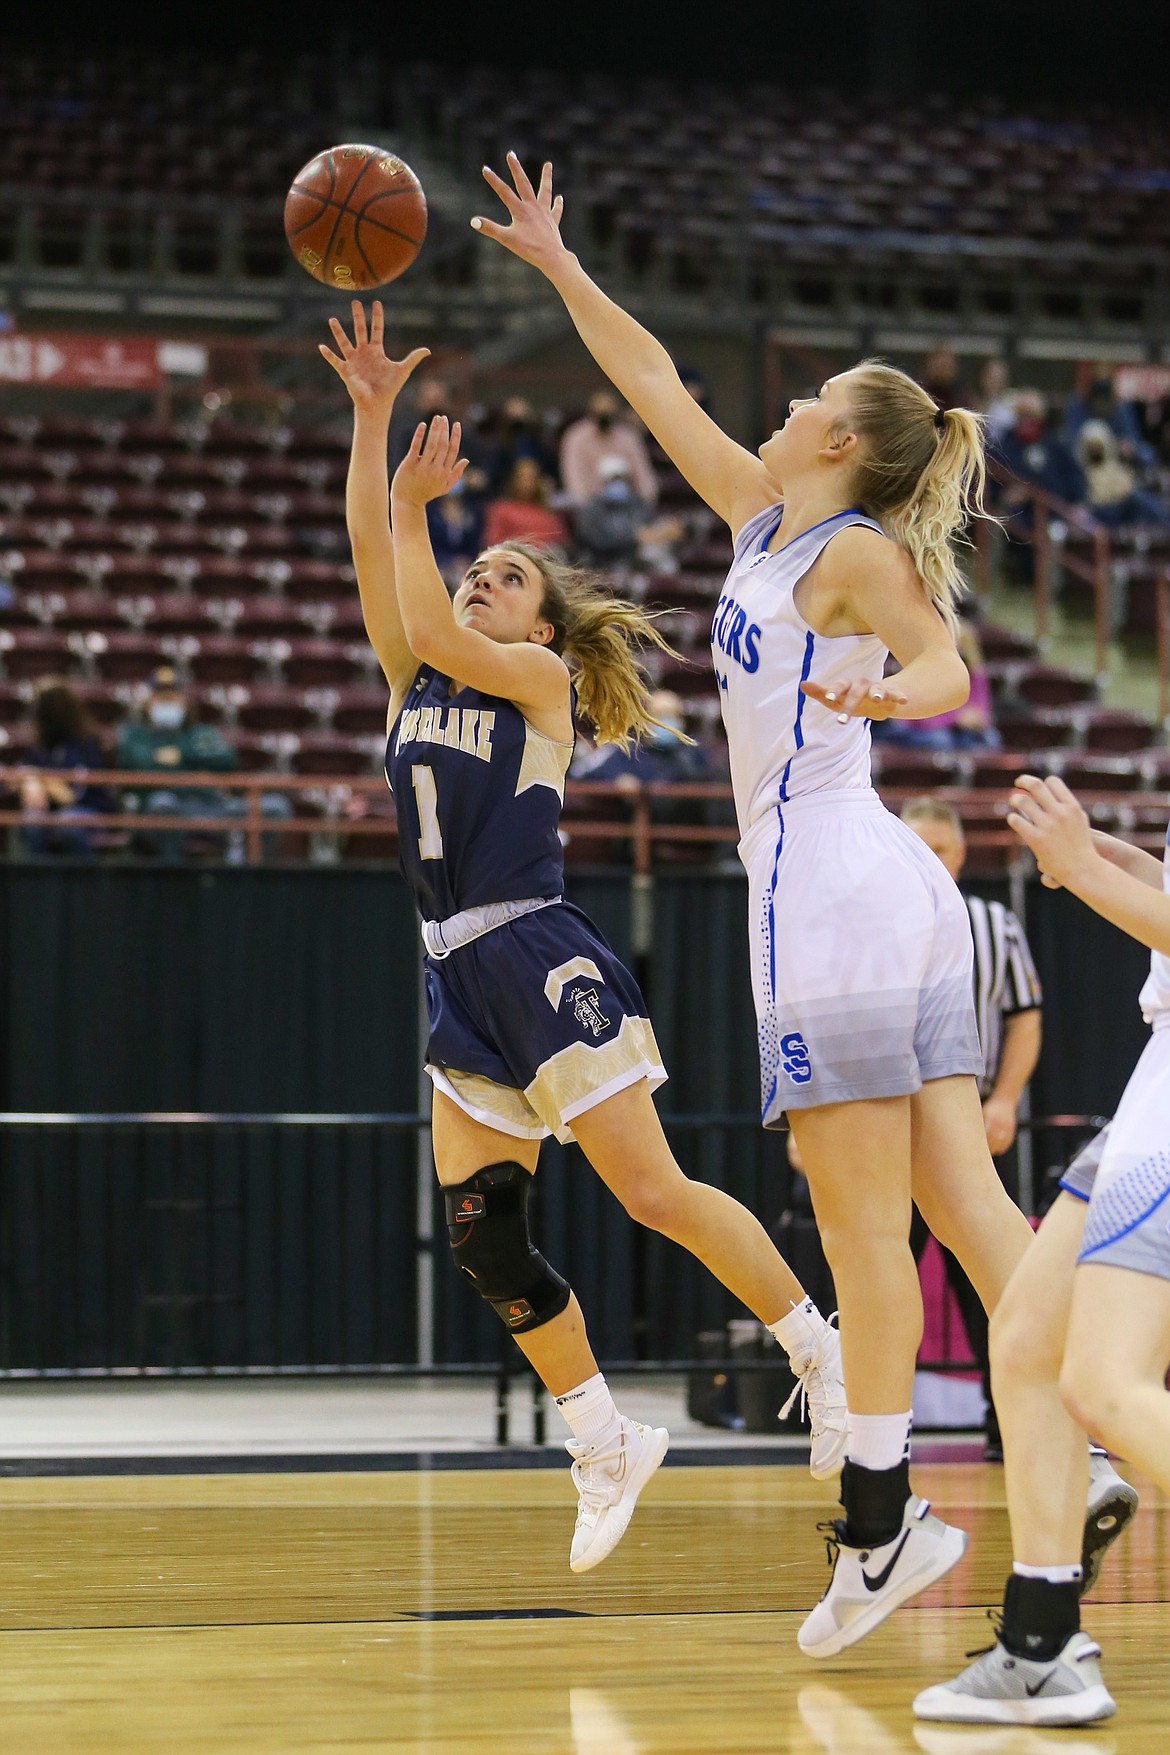 JASON DUCHOW PHOTOGRAPHY
Taryn Soumas (1) of Timberlake goes up for a layup against Sugar-Salem in the championship game of the state 3A girls basketball tournament Saturday at the Ford Idaho Center in Nampa.